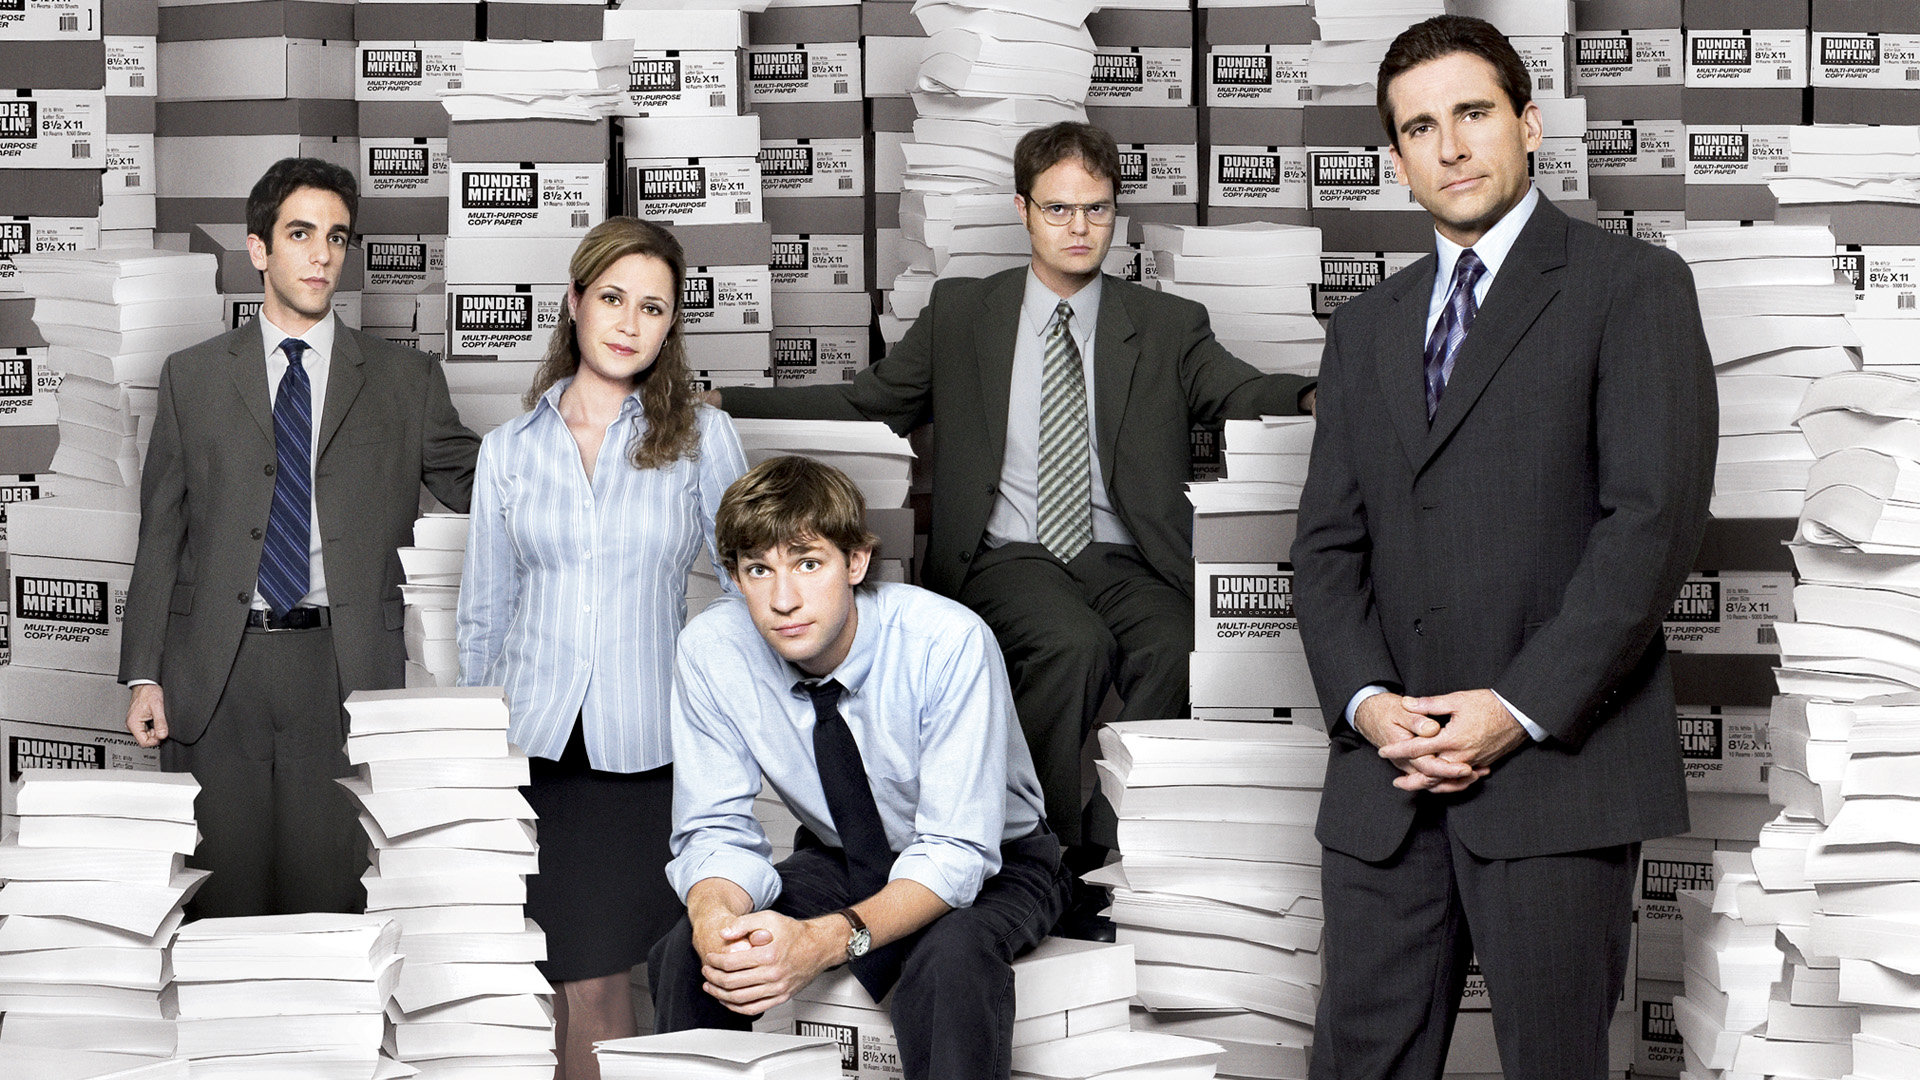 Download full hd 1080p The Office (US) PC wallpaper ID:45988 for free